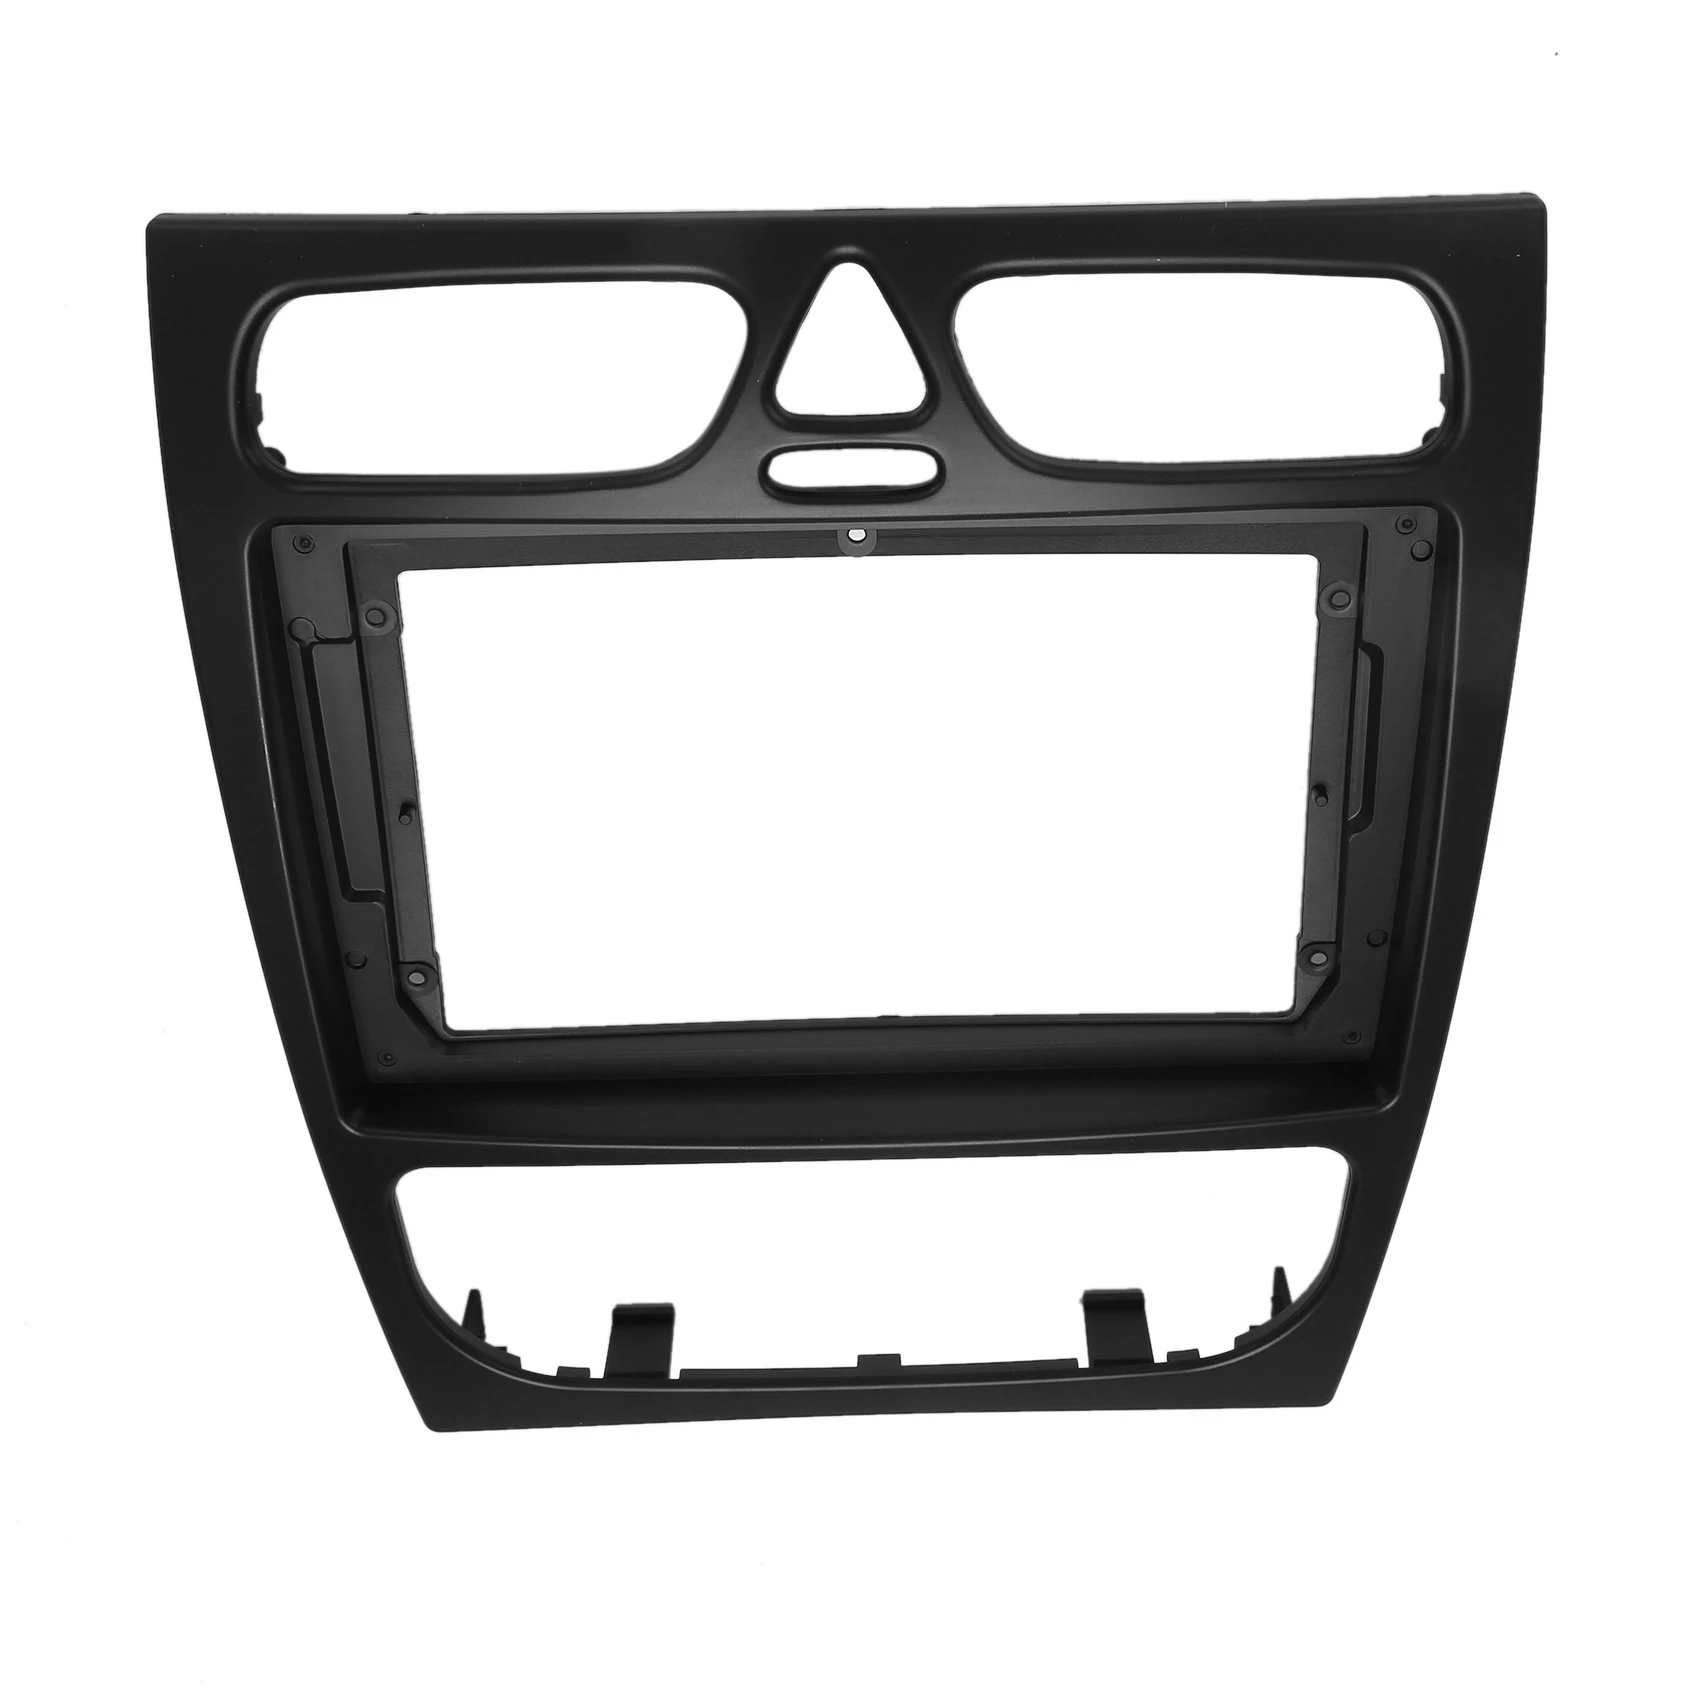 

Car Radio Fascia for Benz C CLASS W203 02-04 DVD Stereo Frame Plate Adapter Mounting Dash Installation Bezel Trim Kit